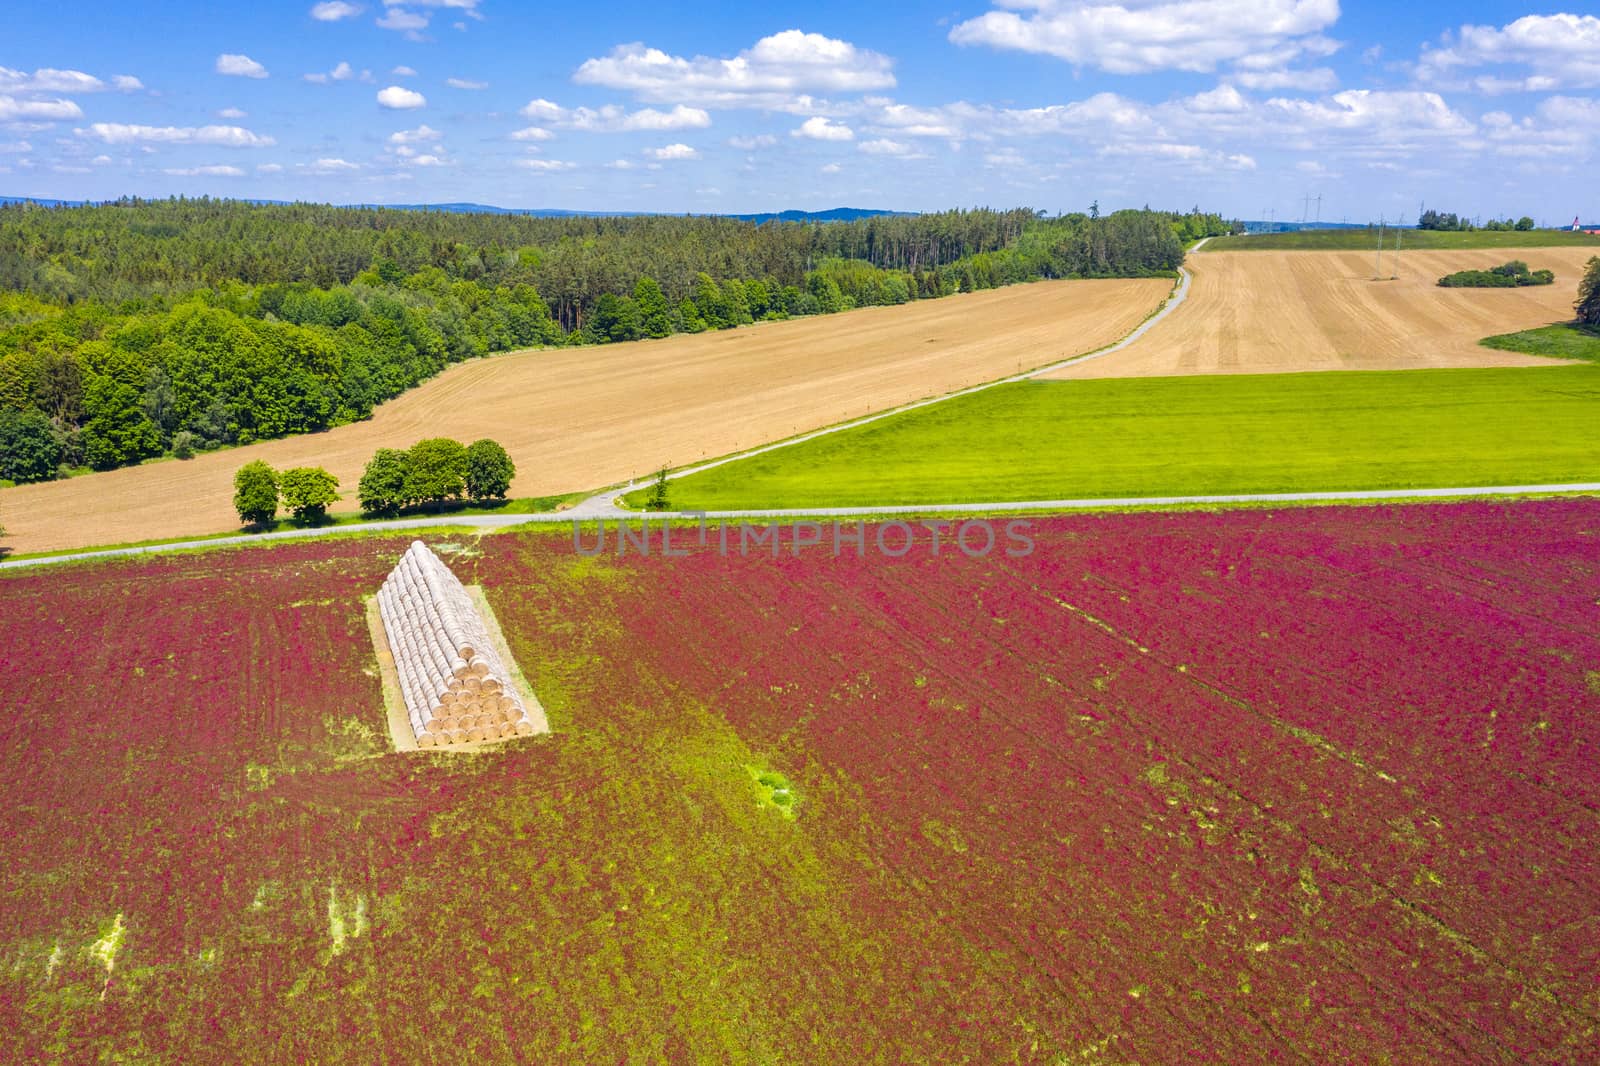 Crimson clover field and heap of bales from above by fyletto